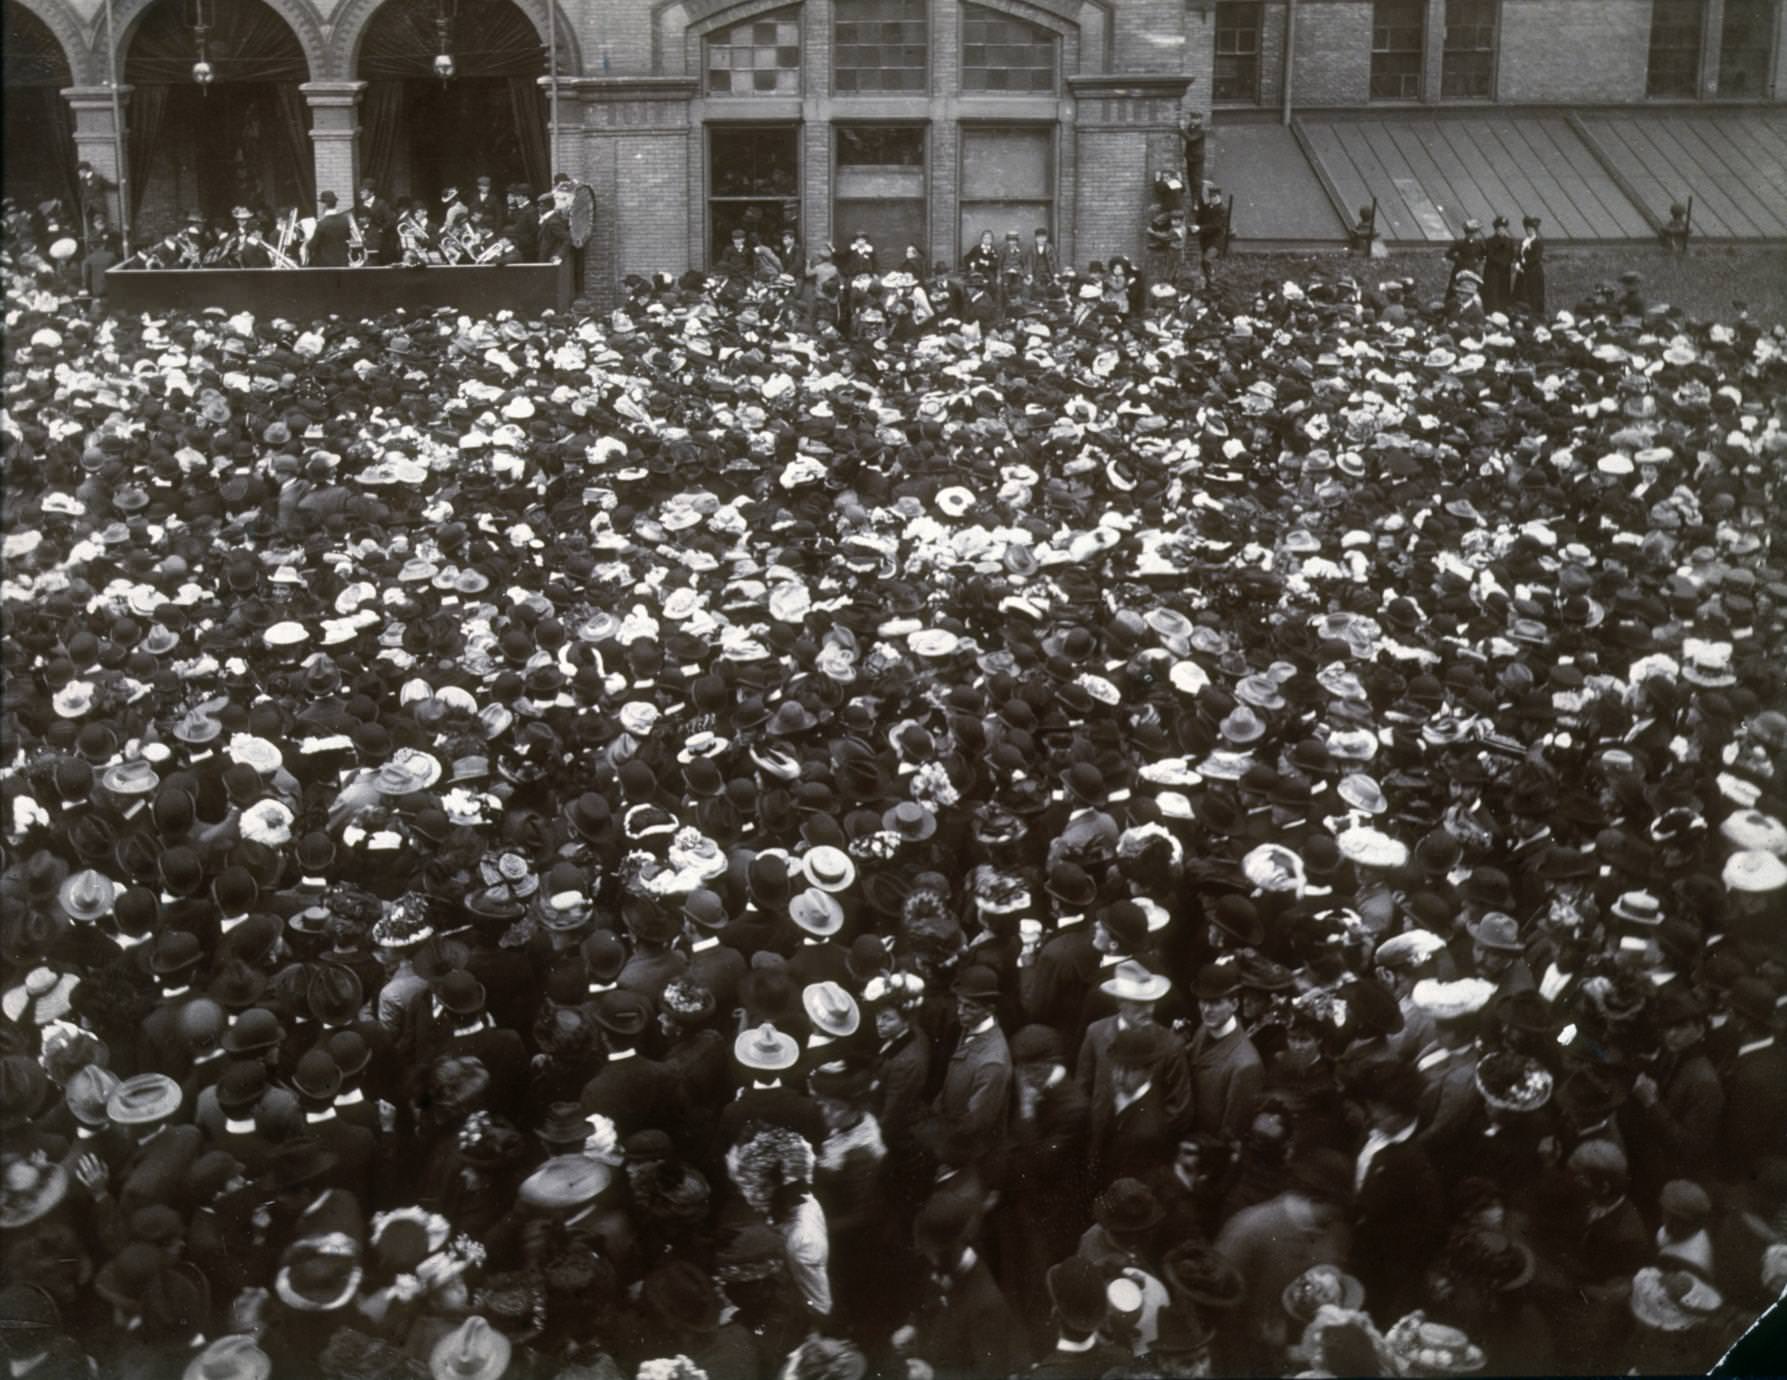 Crowds fill a Milwaukee street as a band plays at a Sängerfest competition, 1886